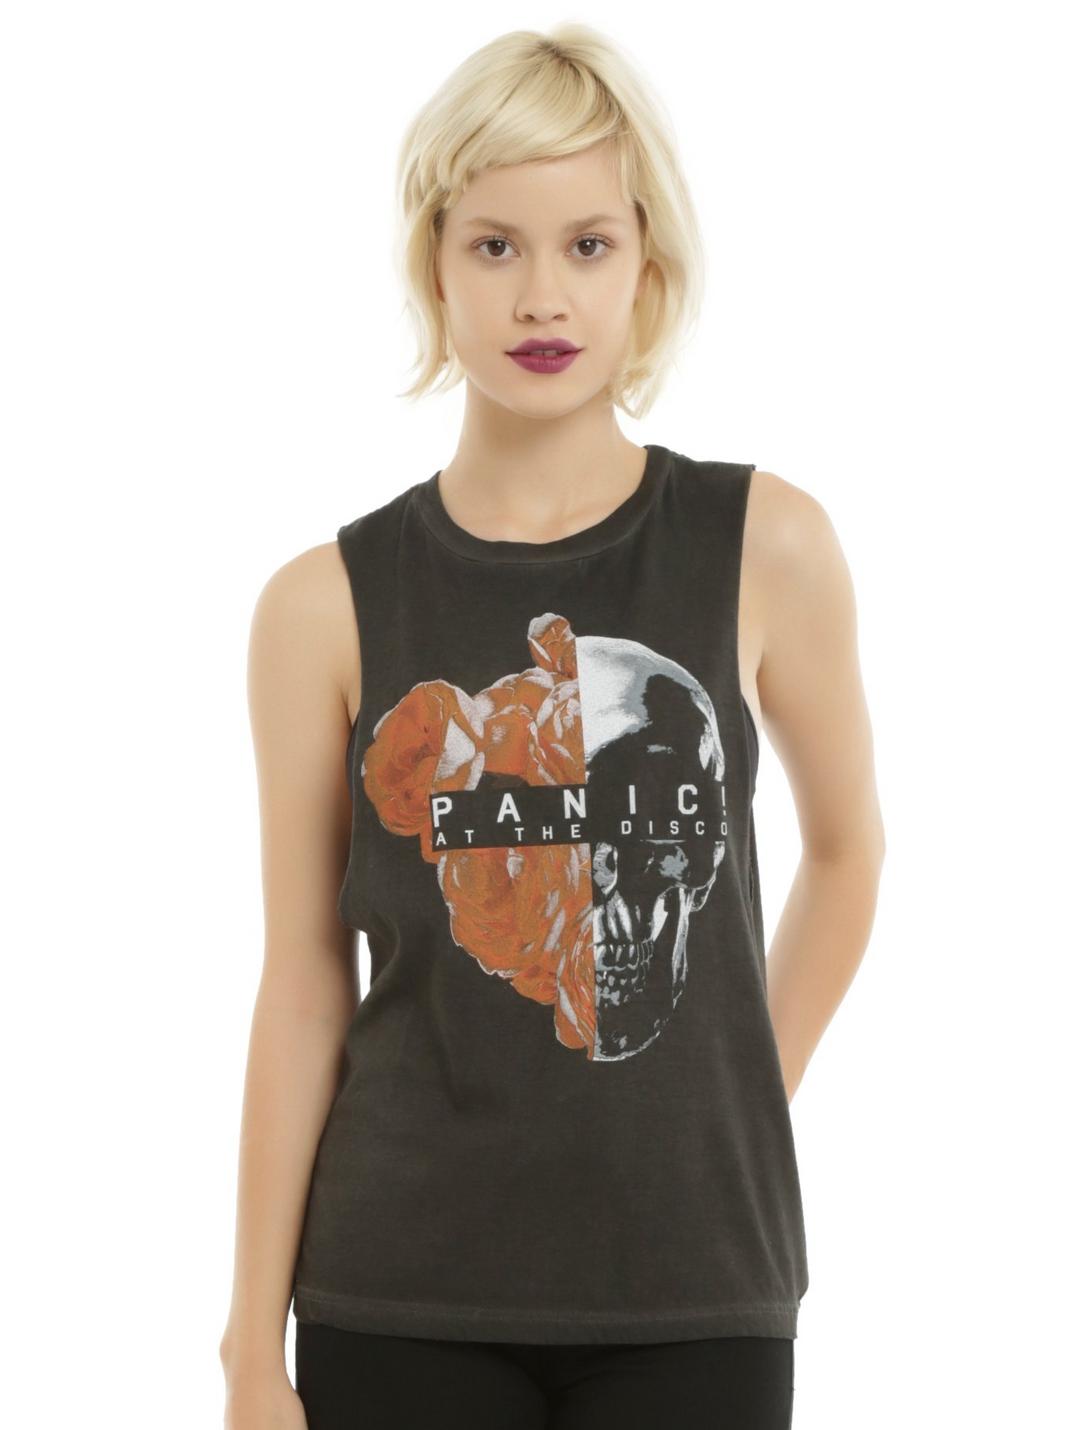 Panic! At The Disco Flower Skull Girls Muscle Top, BLACK, hi-res